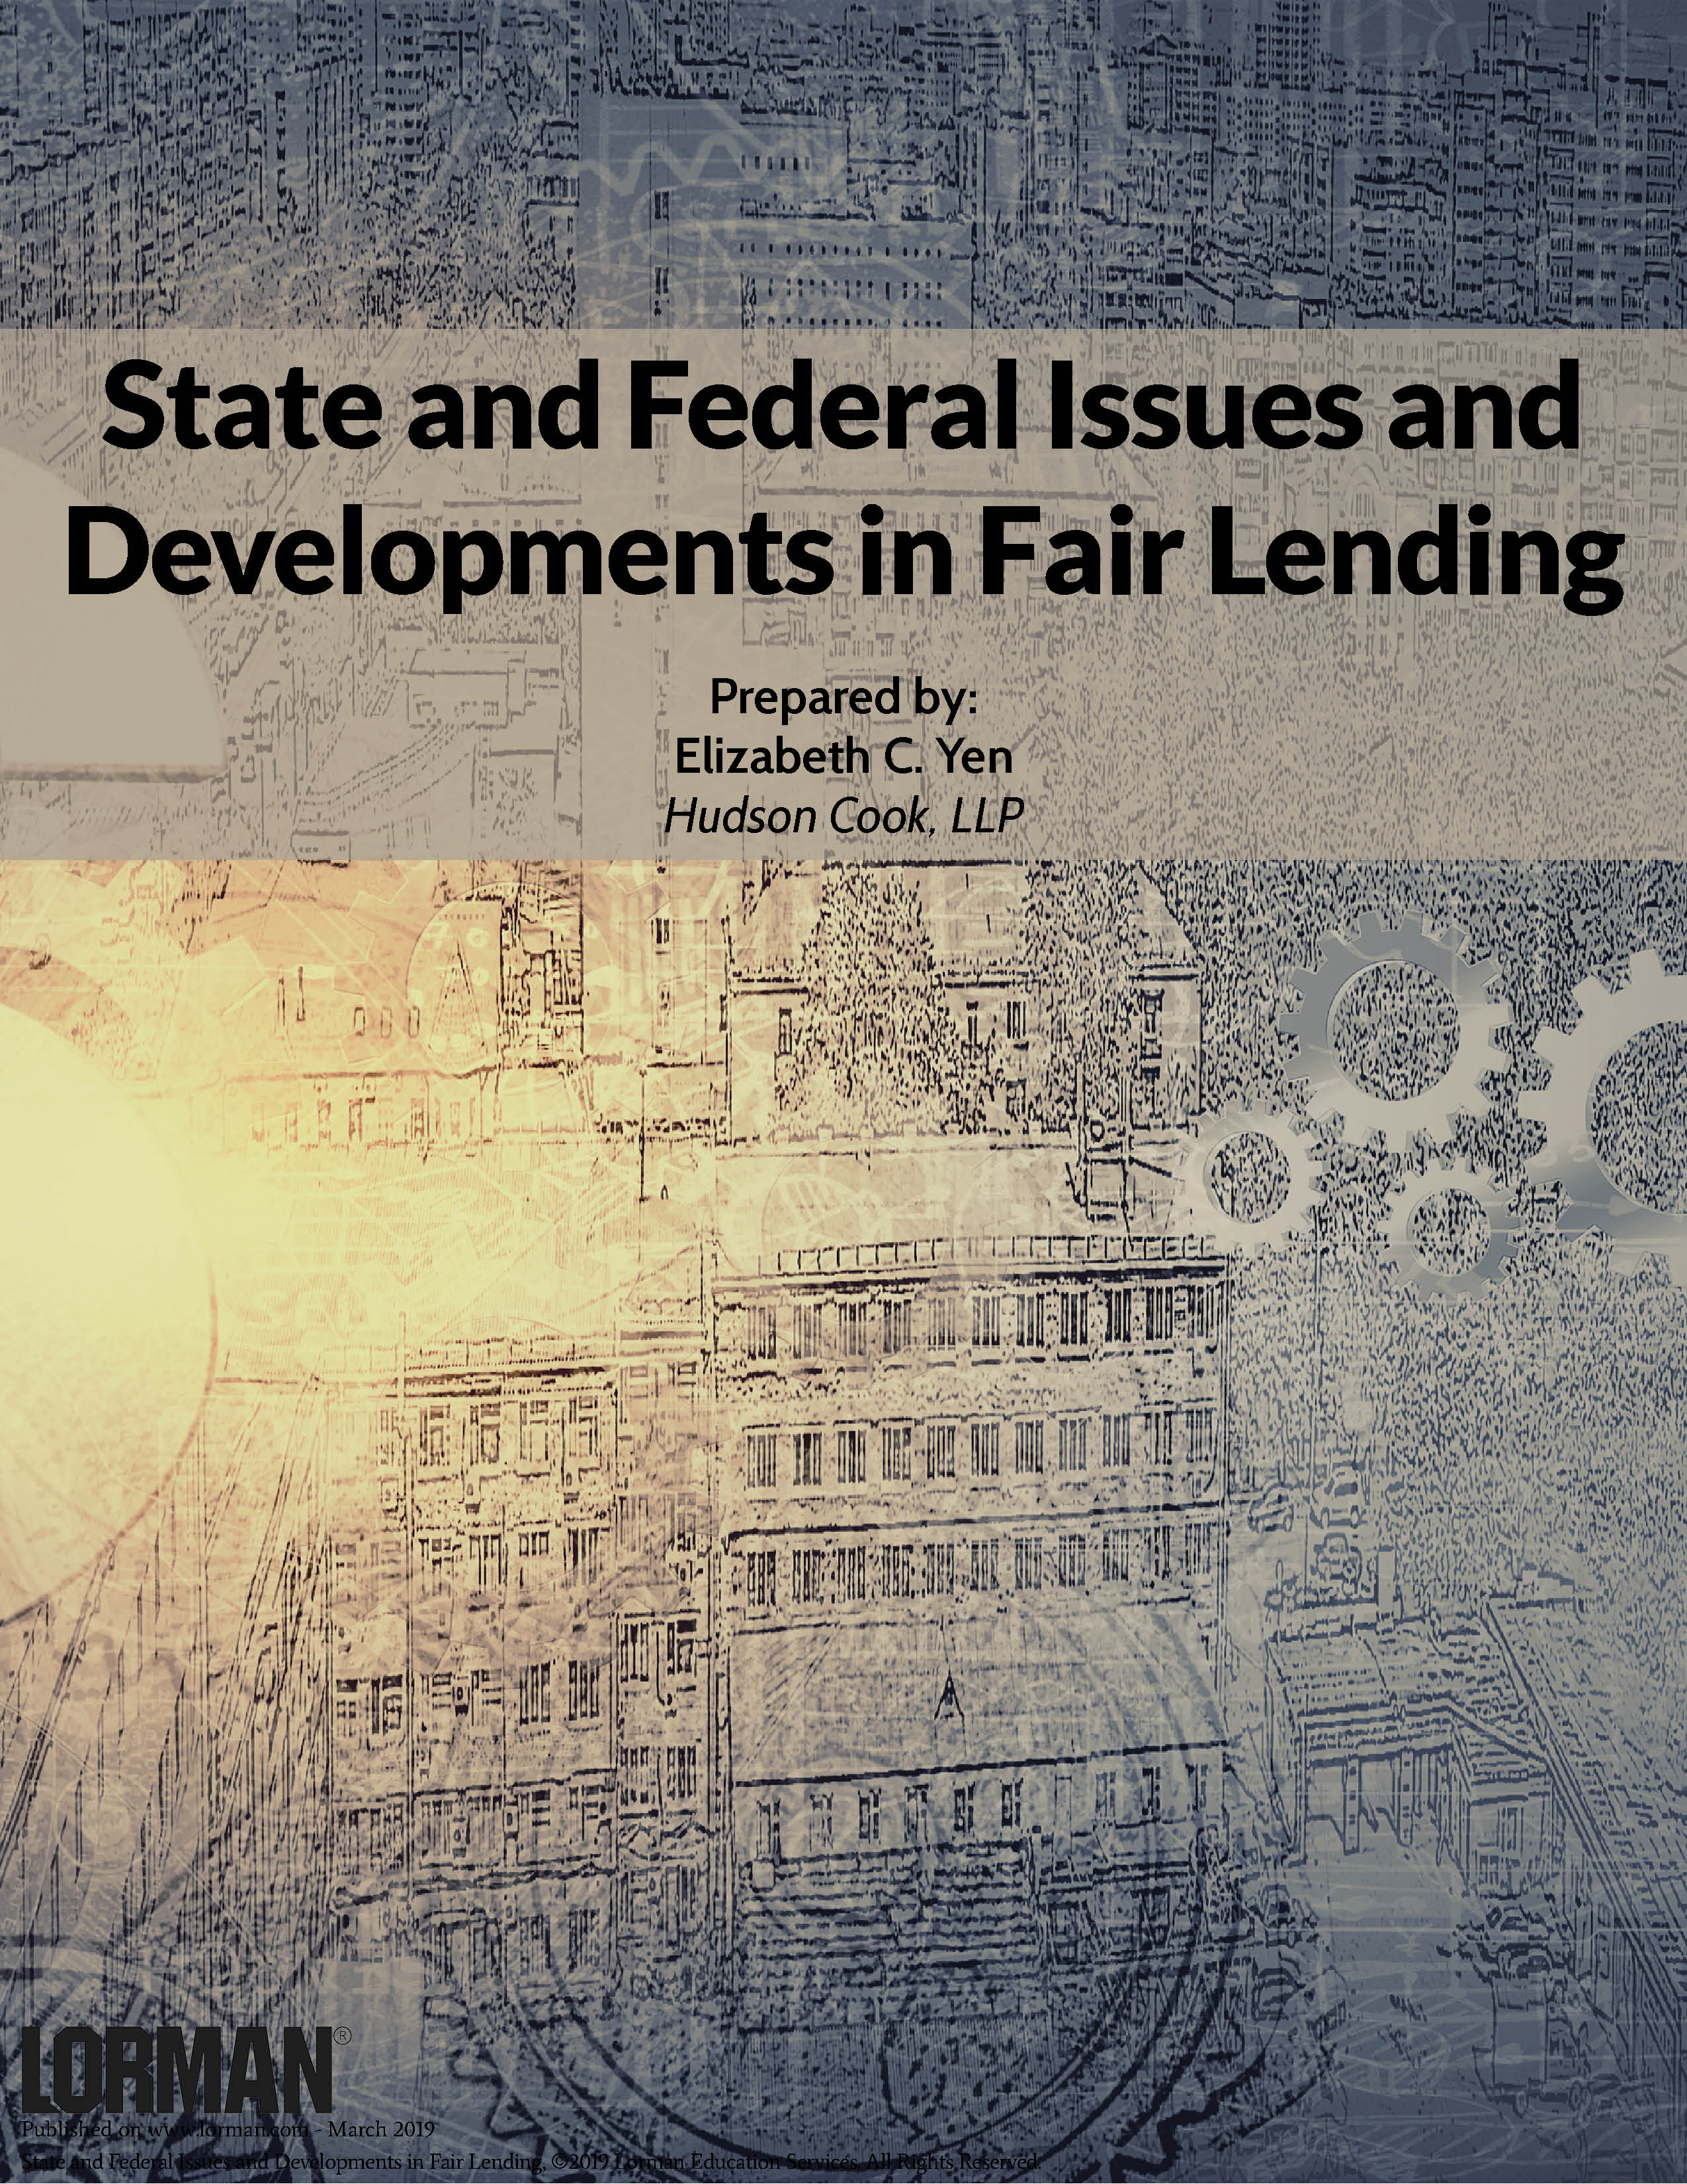 State and Federal Issues and Developments in Fair Lending